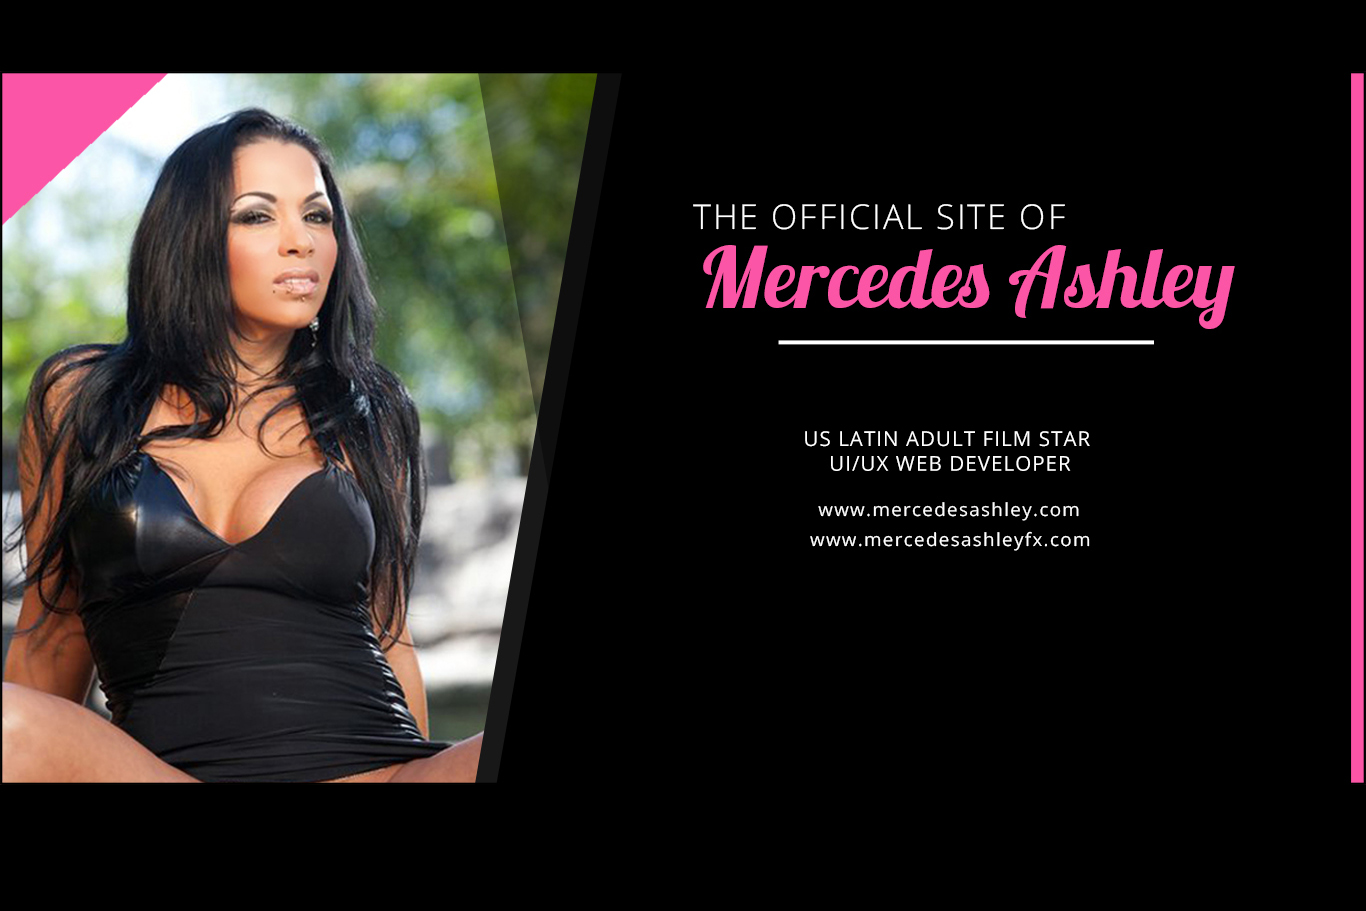 mercedes ashley us latin adult porn star featured in over 4